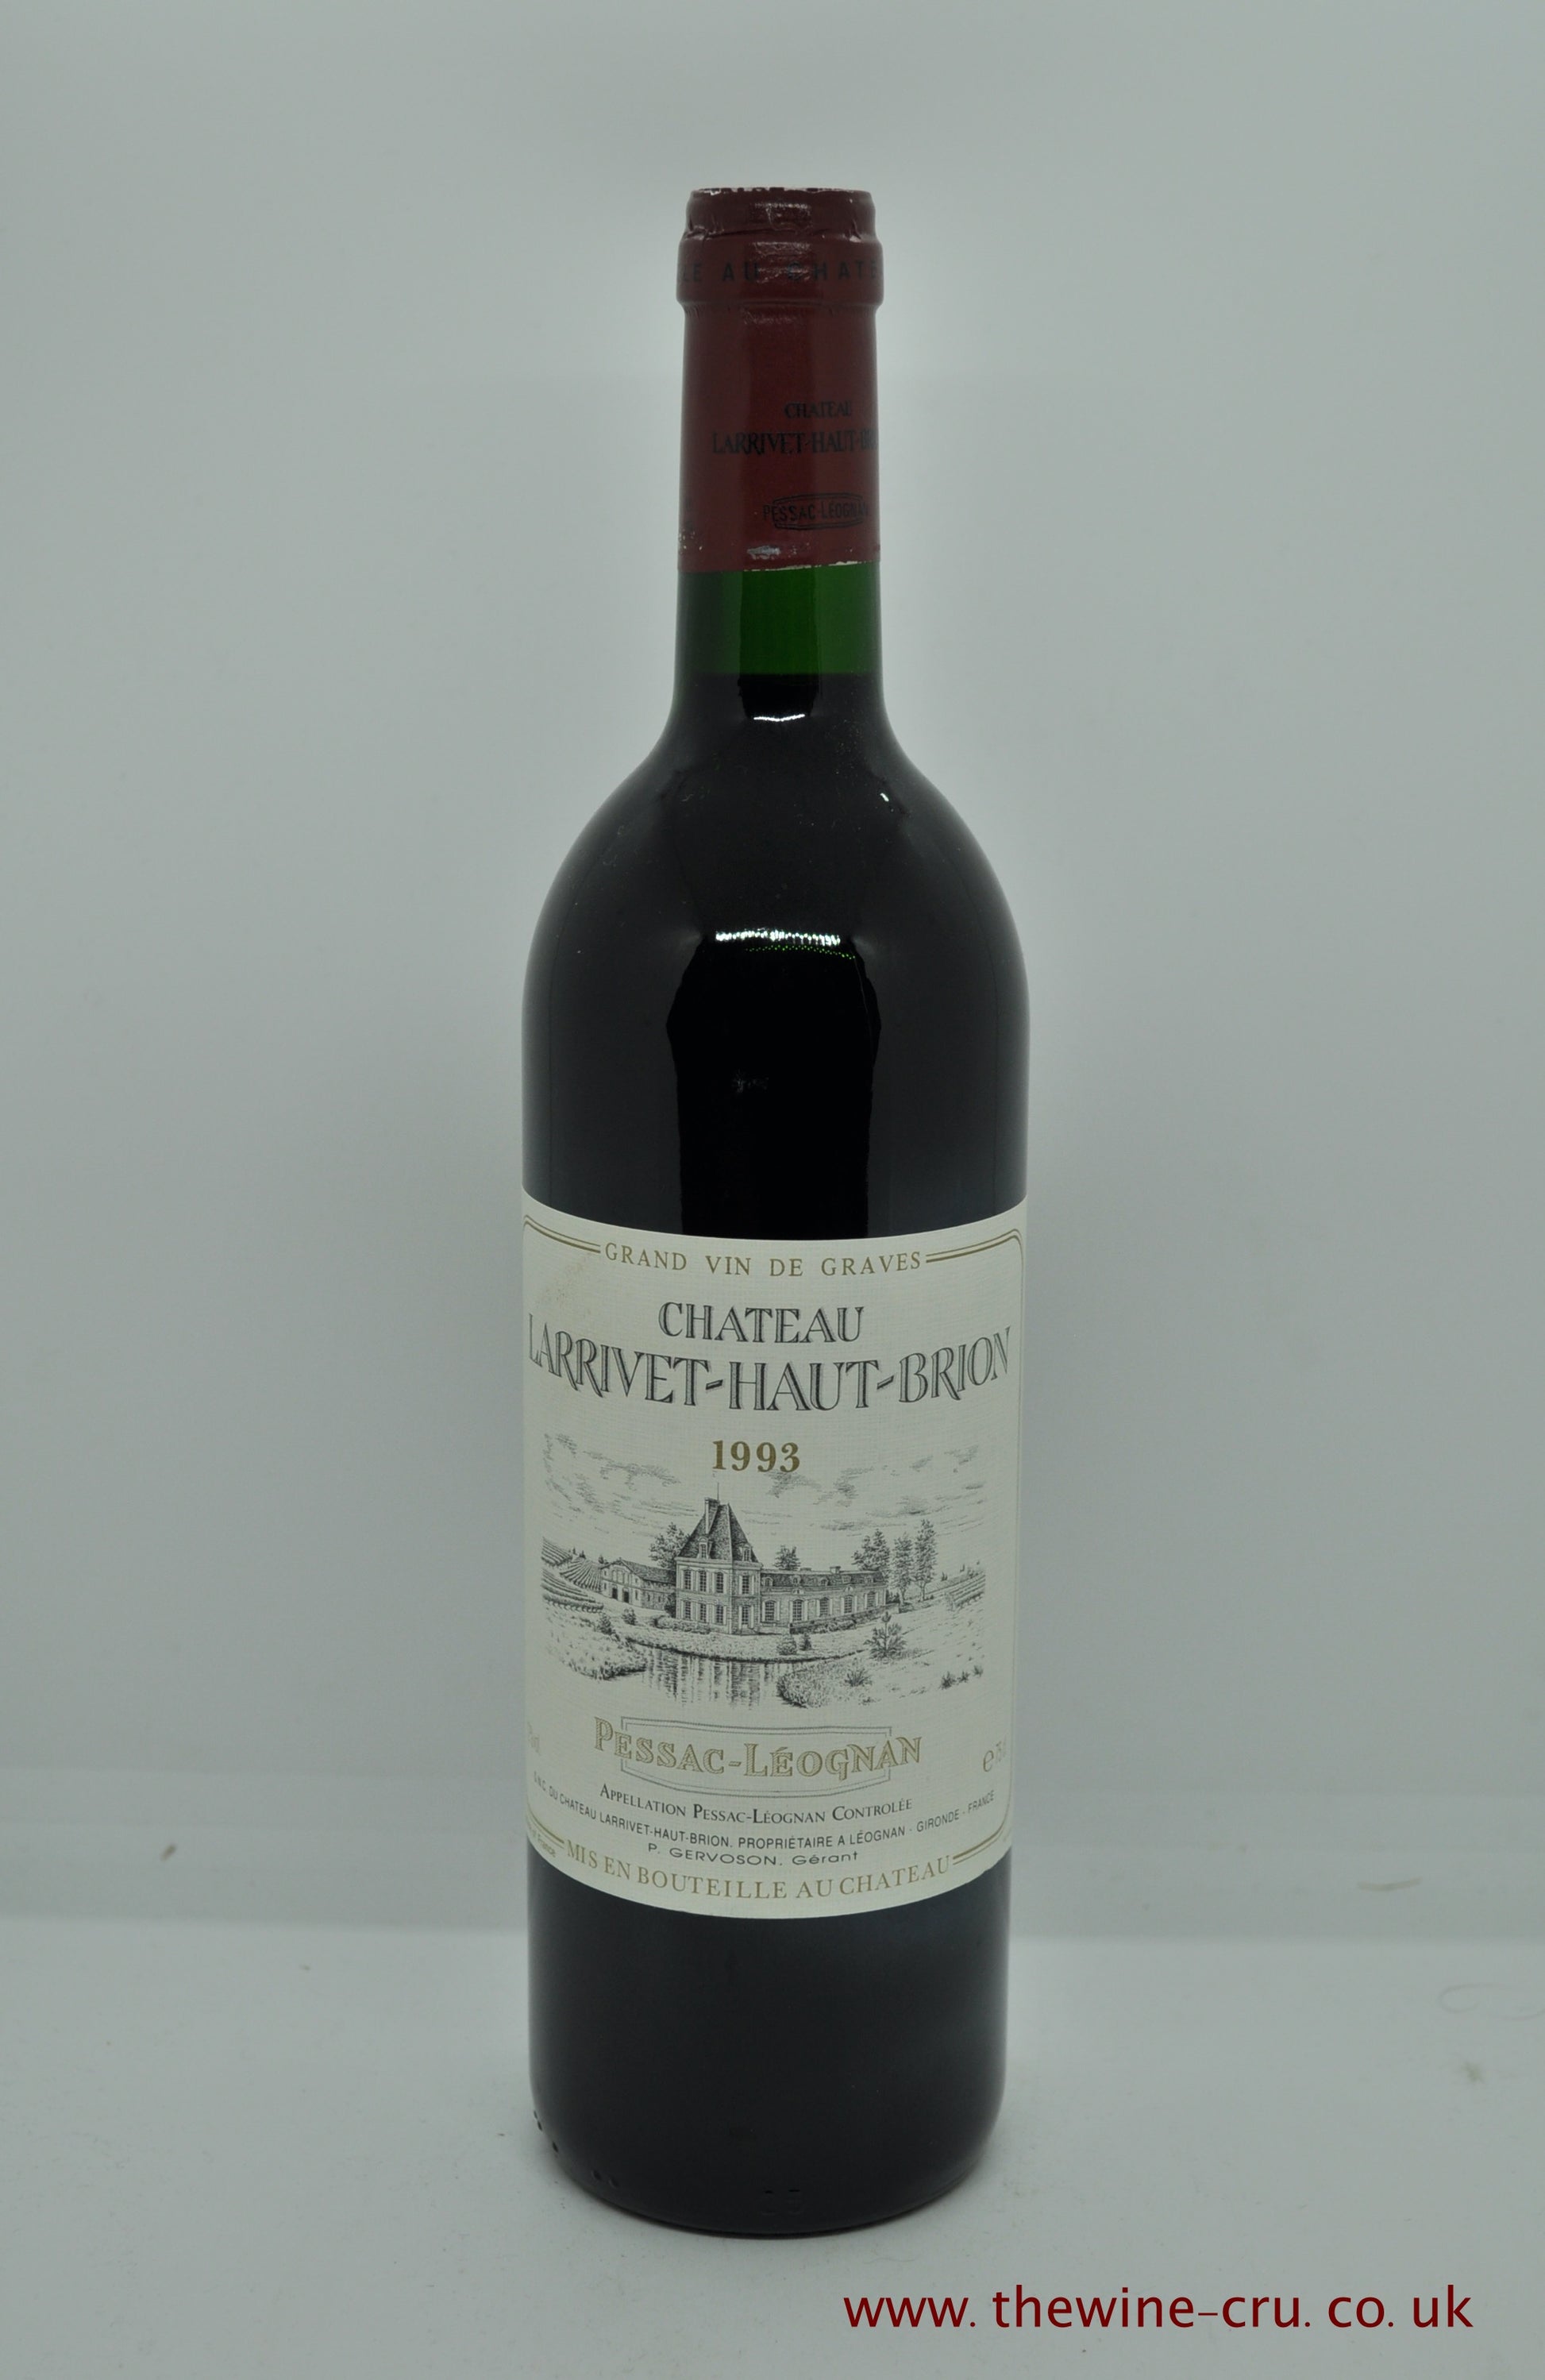 a bottle of 1993 vintage red wine. Chateau Larrivet Haut Brion 1993, France, Bordeaux. The bottle is in good condition with the wine level being in neck. Immediate delivery. Free local delivery. Gift wrapping available.